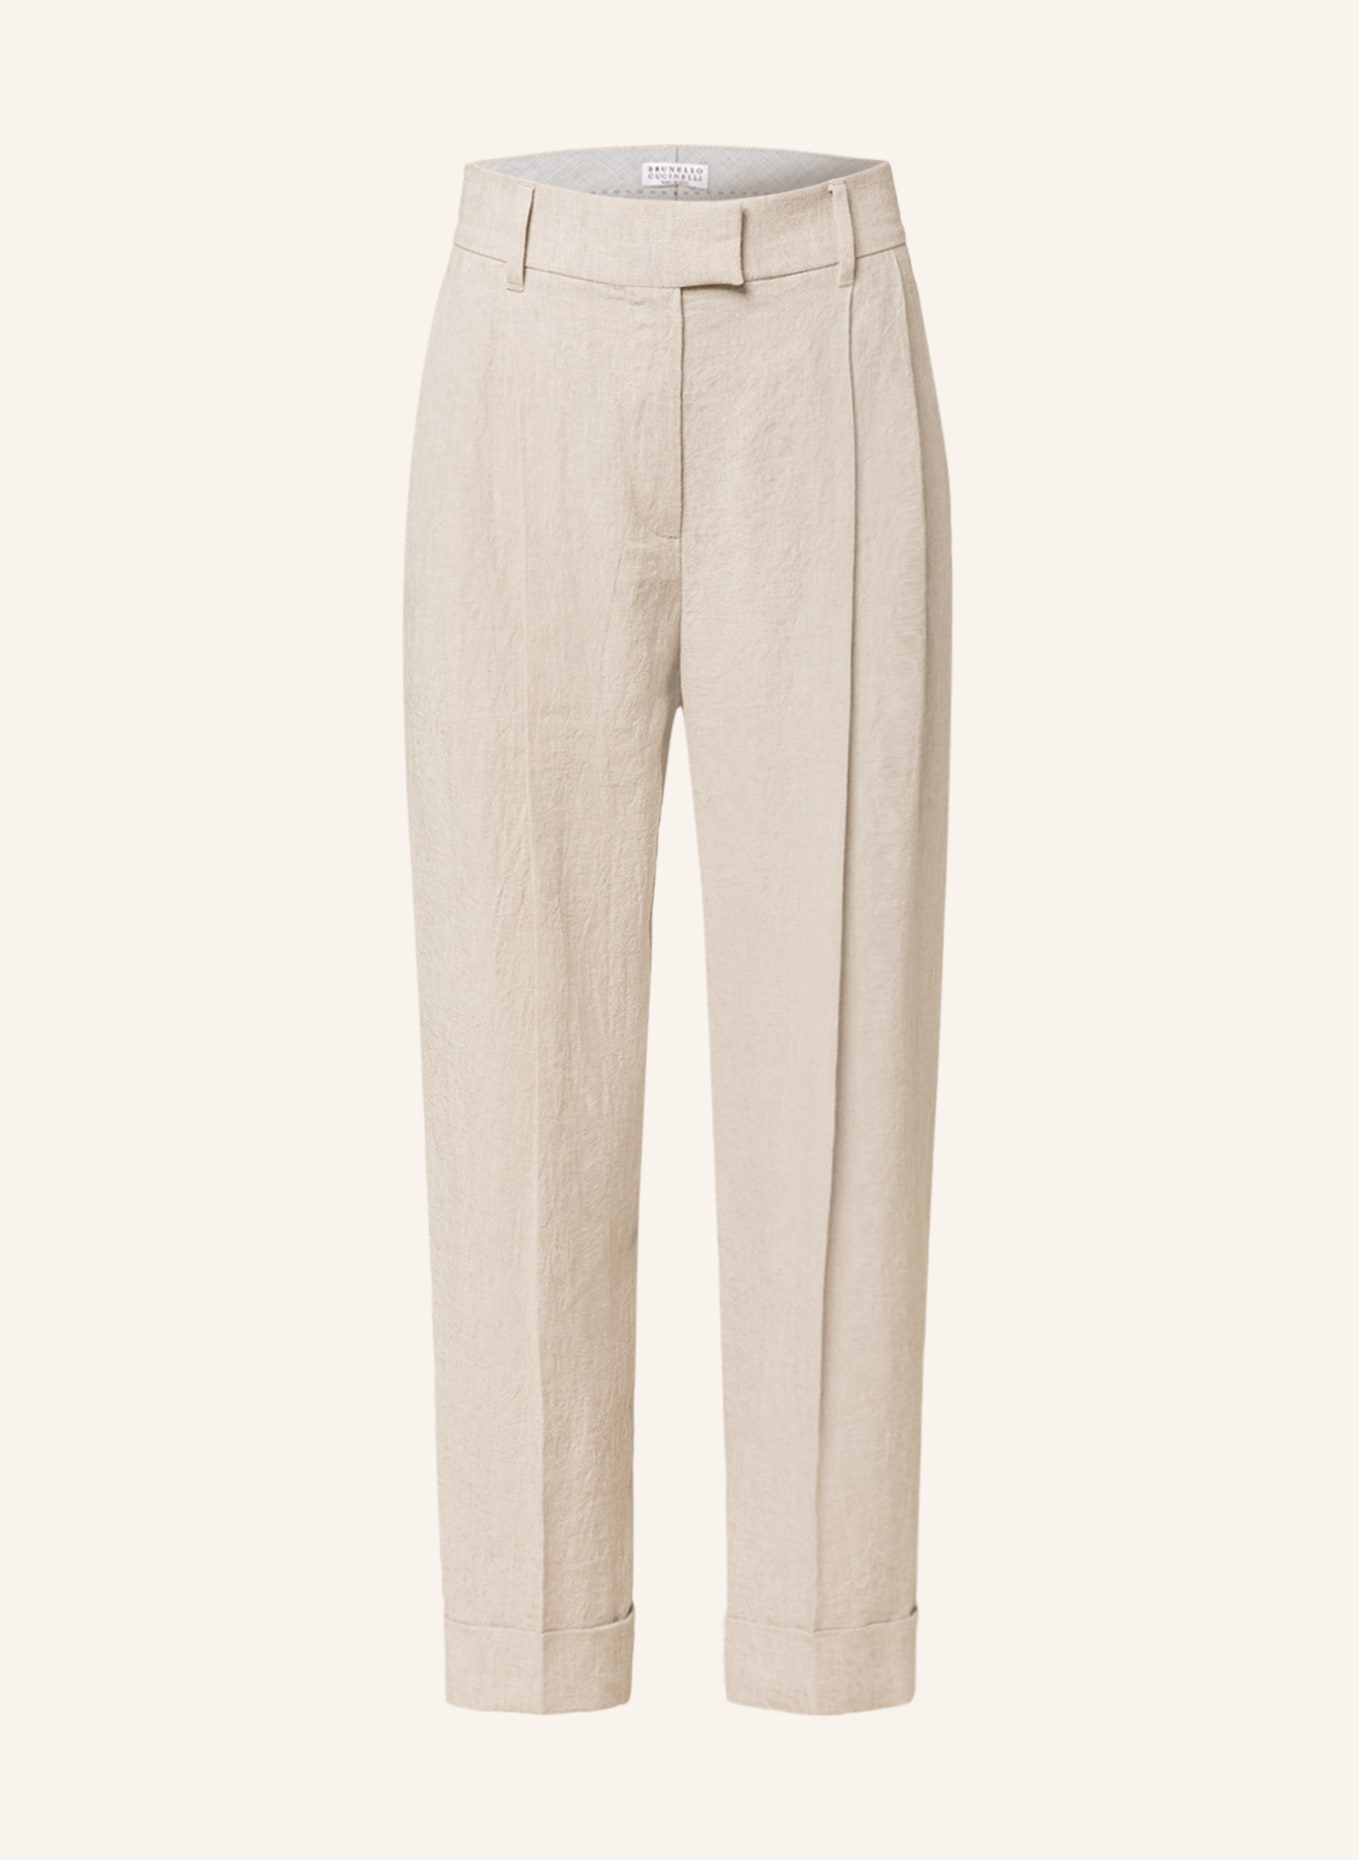 BRUNELLO CUCINELLI 7/8 pants made of linen, Color: LIGHT BROWN (Image 1)